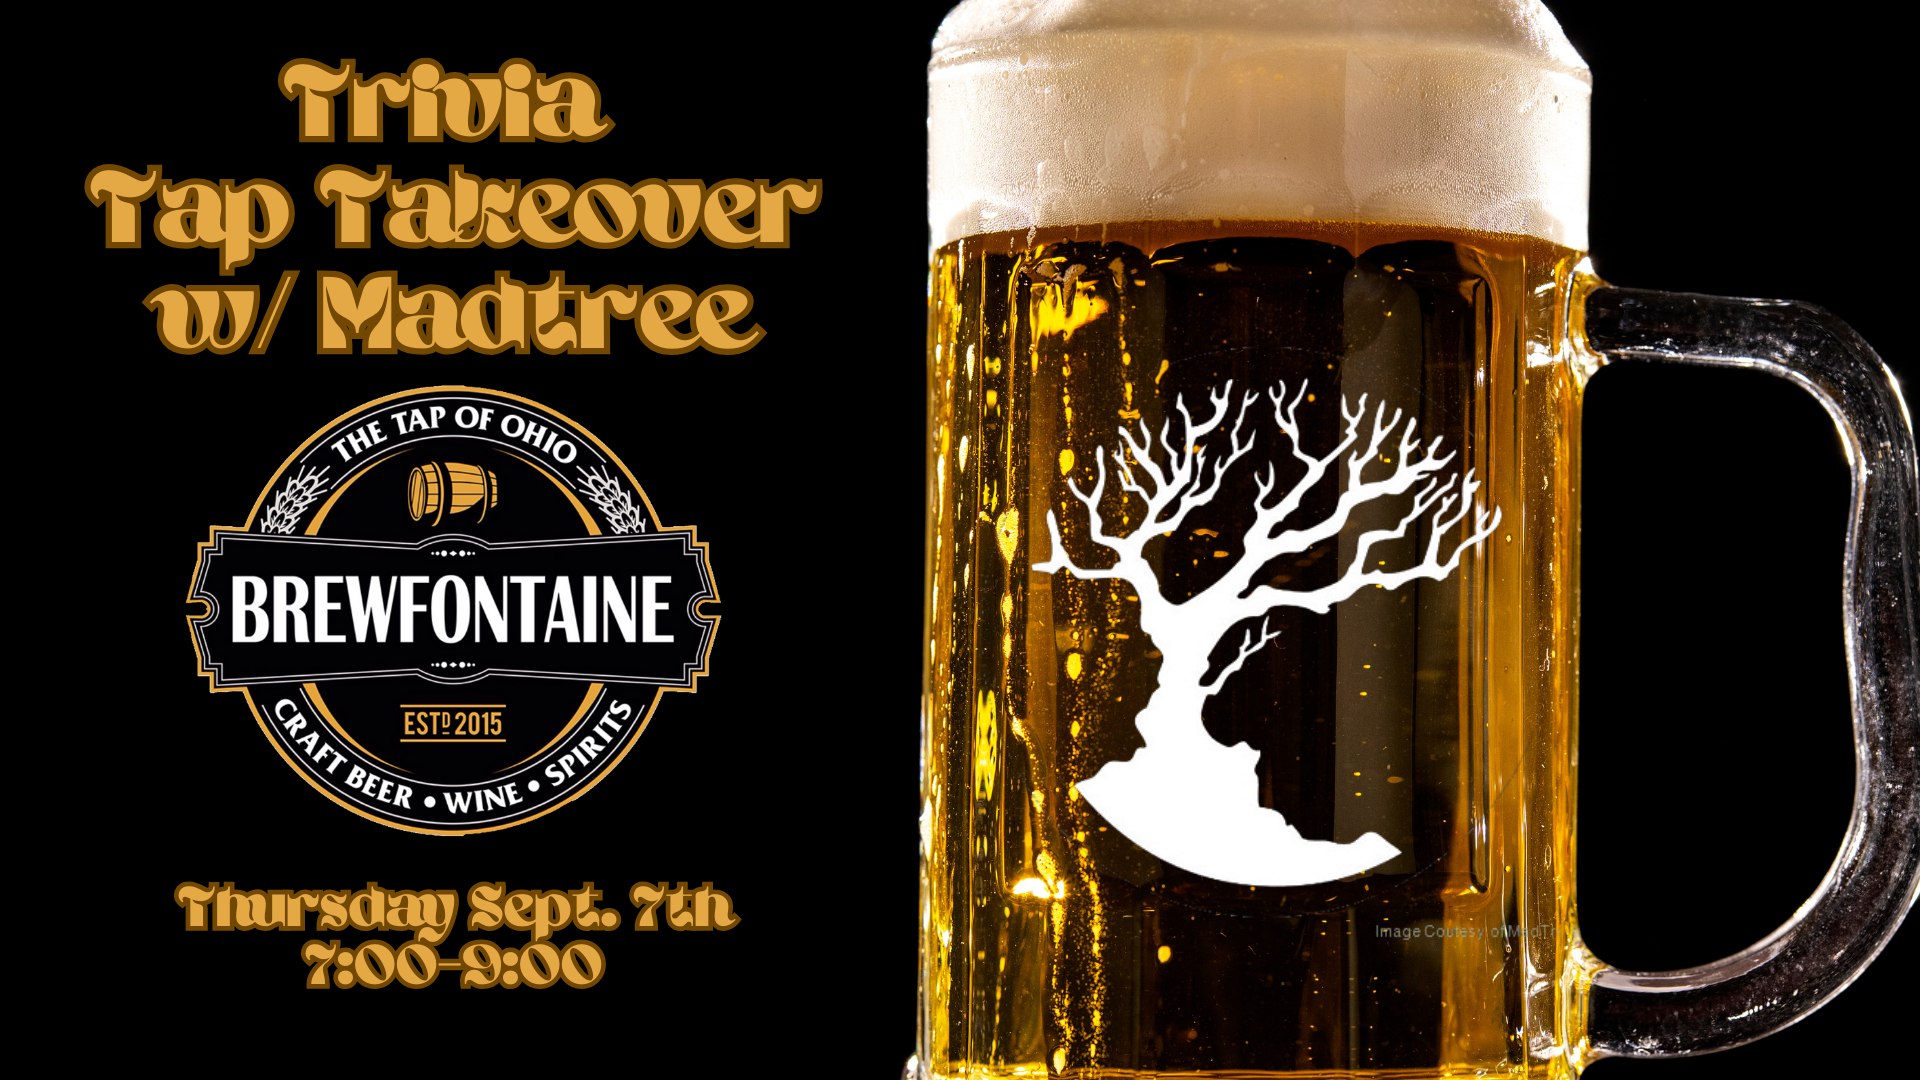 Trivia Tap Takeover with Madtree Brewing